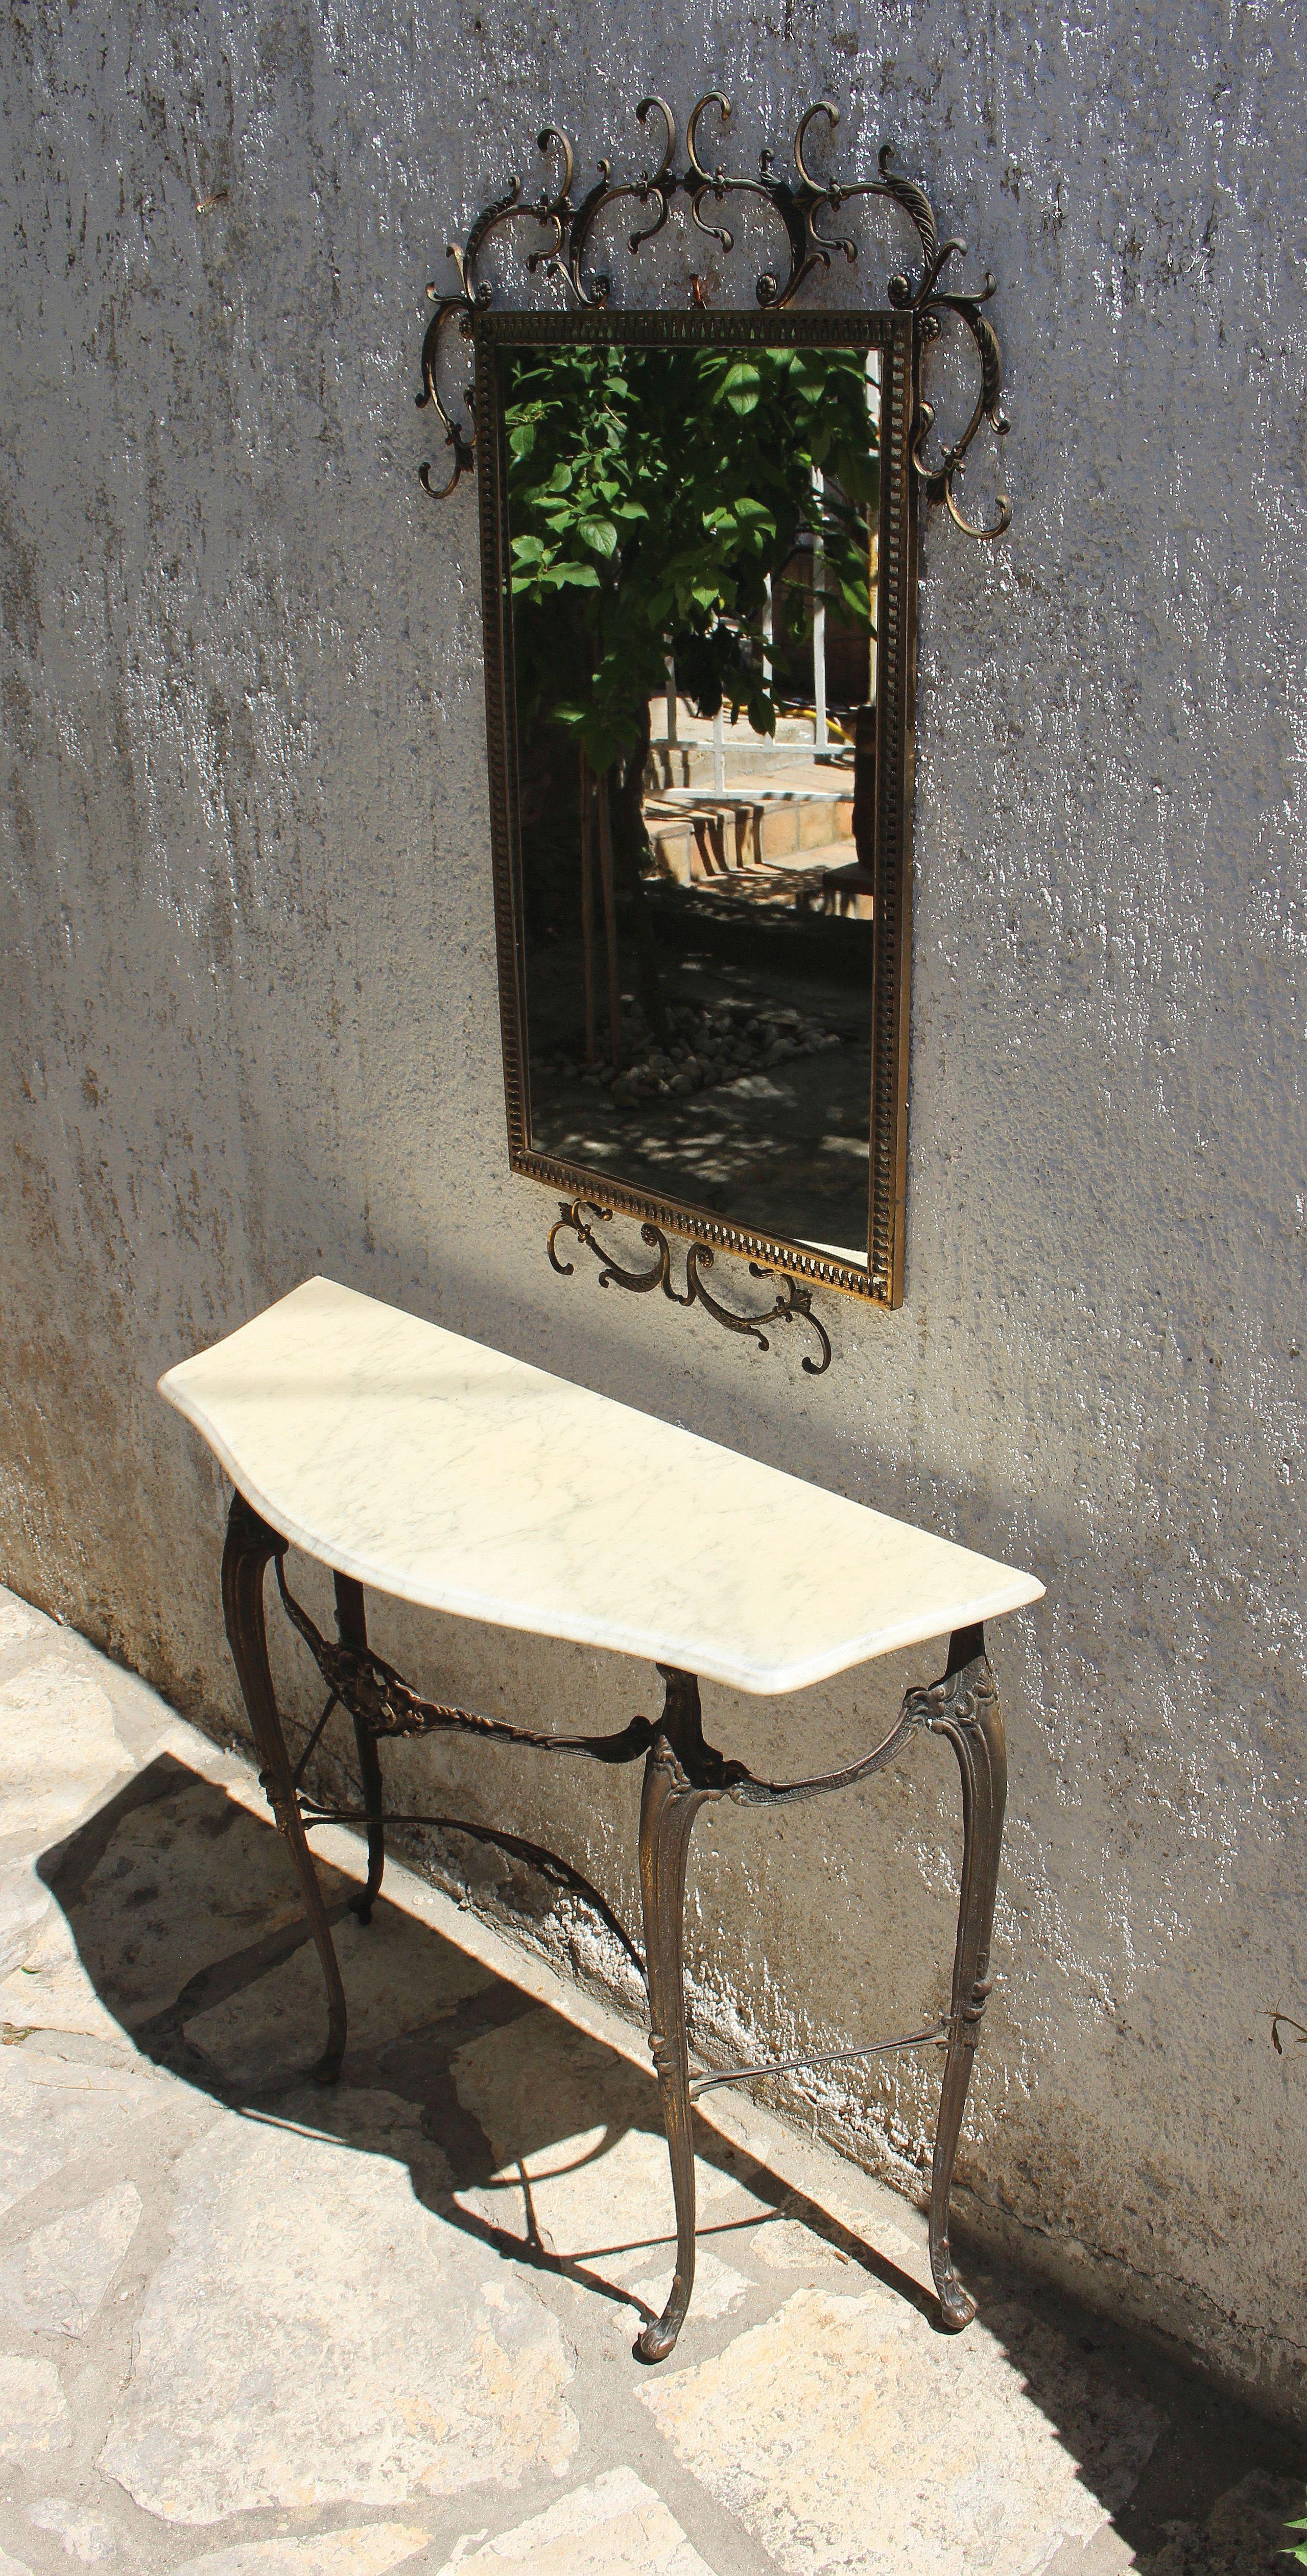 Neoclassical style brass base and marble top entry console table. Matching brass mirror.
Dimension for he mirror is : H; 35.5 W; 23 D; 6
dimension for the demi Lune table is : H ; 29 W: 33; D; 12.
Shipping to US continental in home delivery $400

